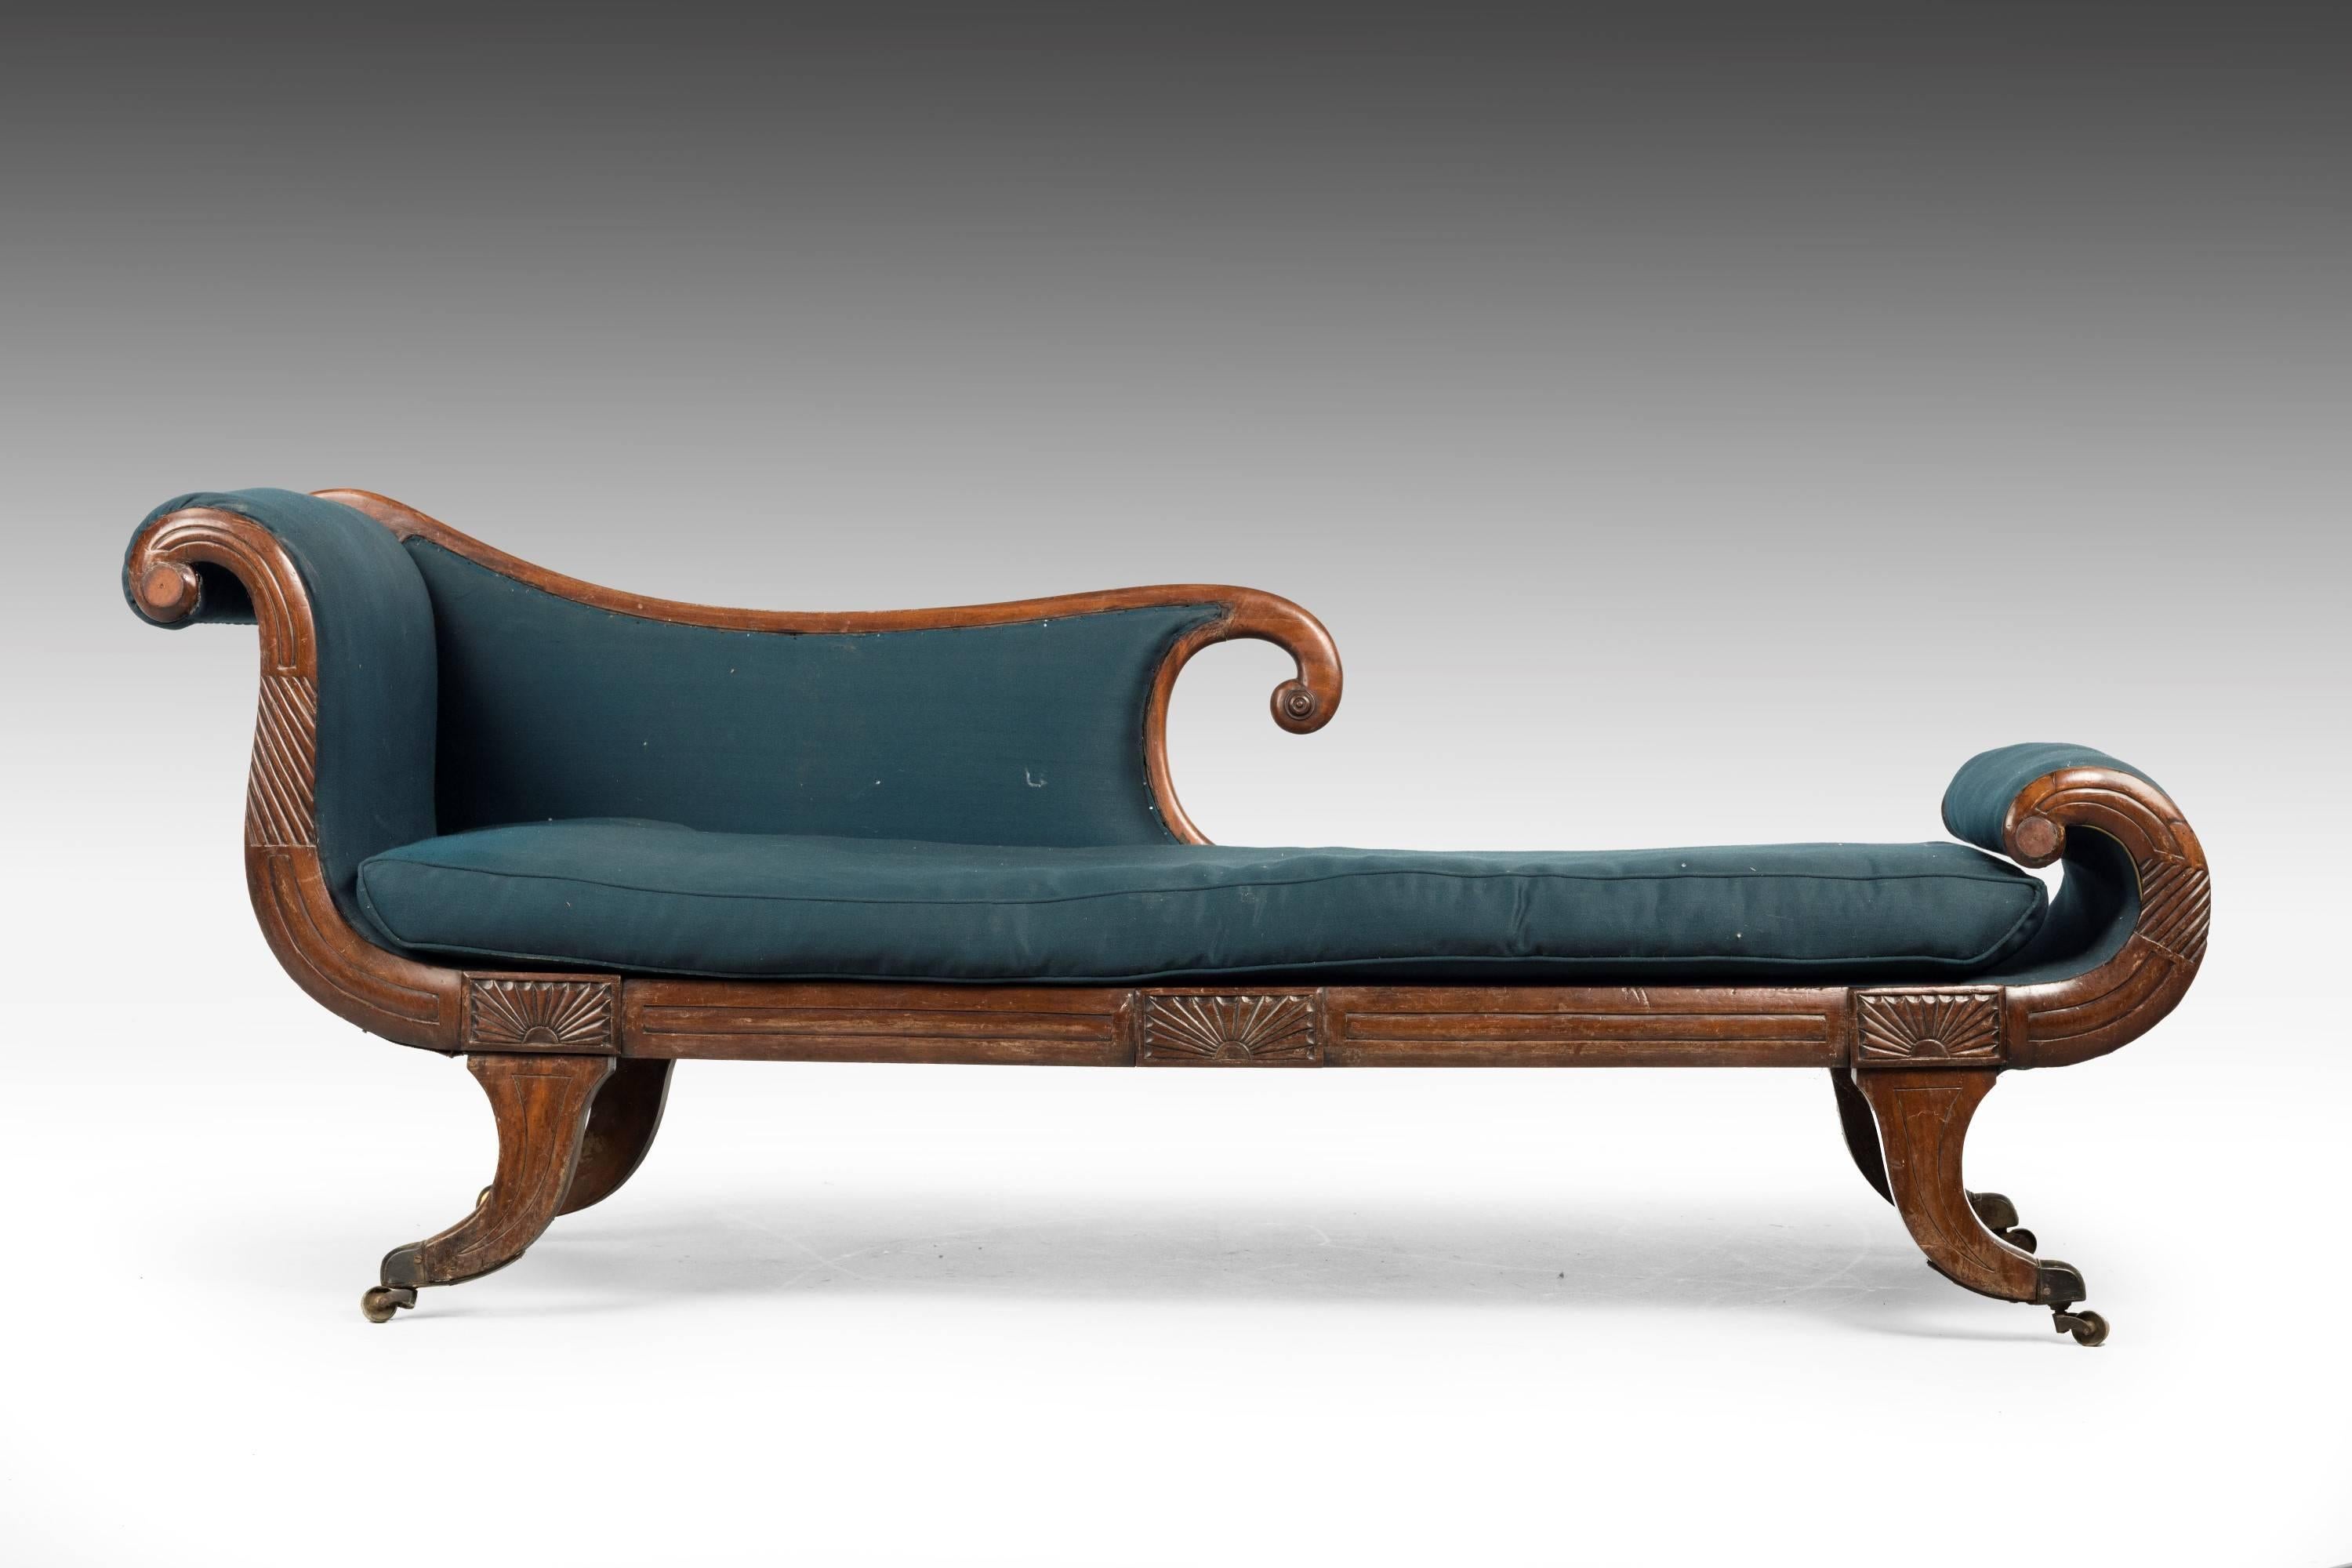 Early 19th Century Regency Period Chaise Longue In Excellent Condition In Peterborough, Northamptonshire